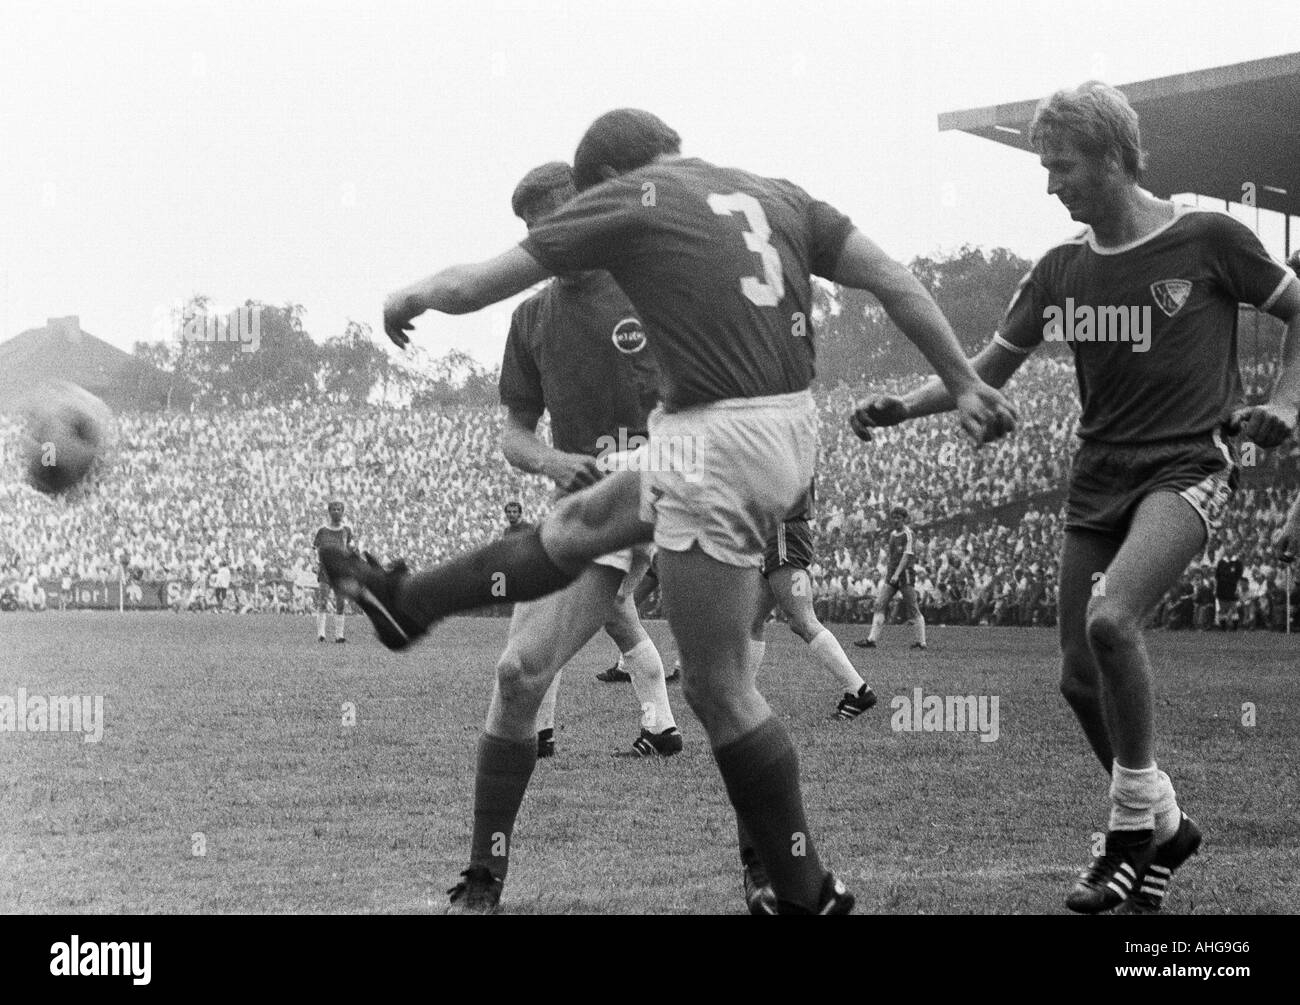 Vfl bochum history Black and White Stock Photos & Images - Page 3 - Alamy